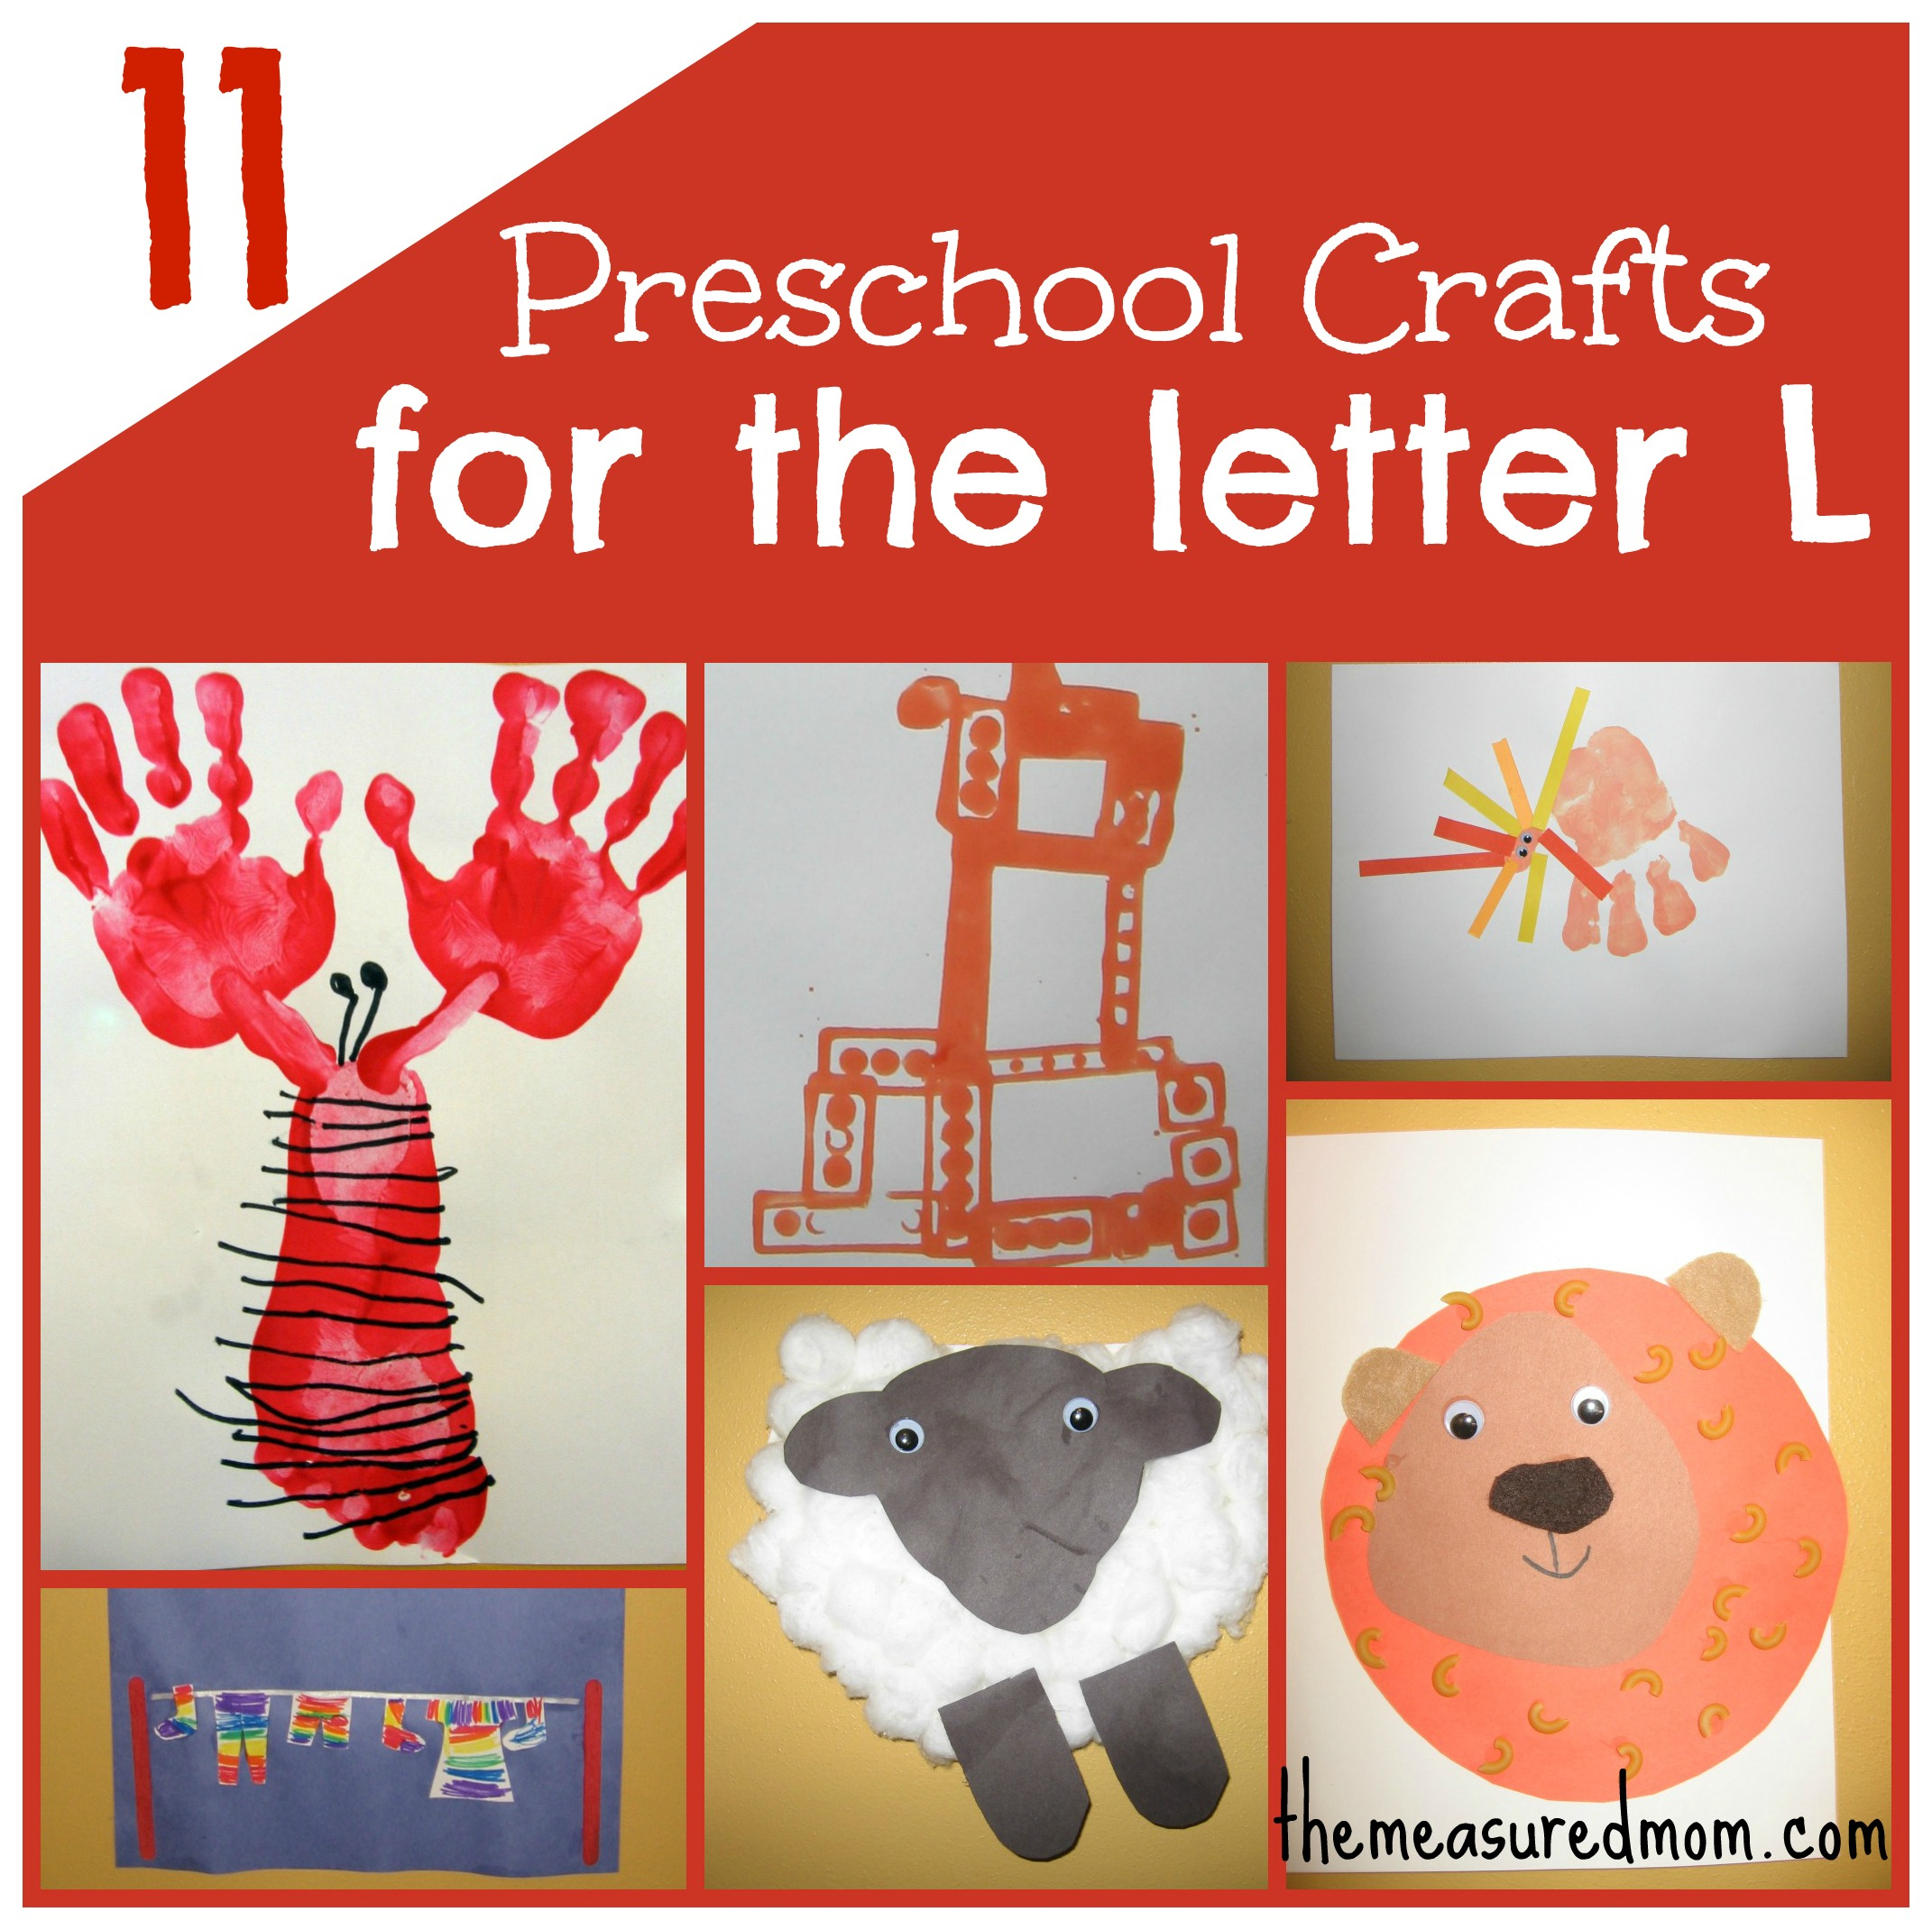 11 Crafts For Preschool: The Letter L - The Measured Mom